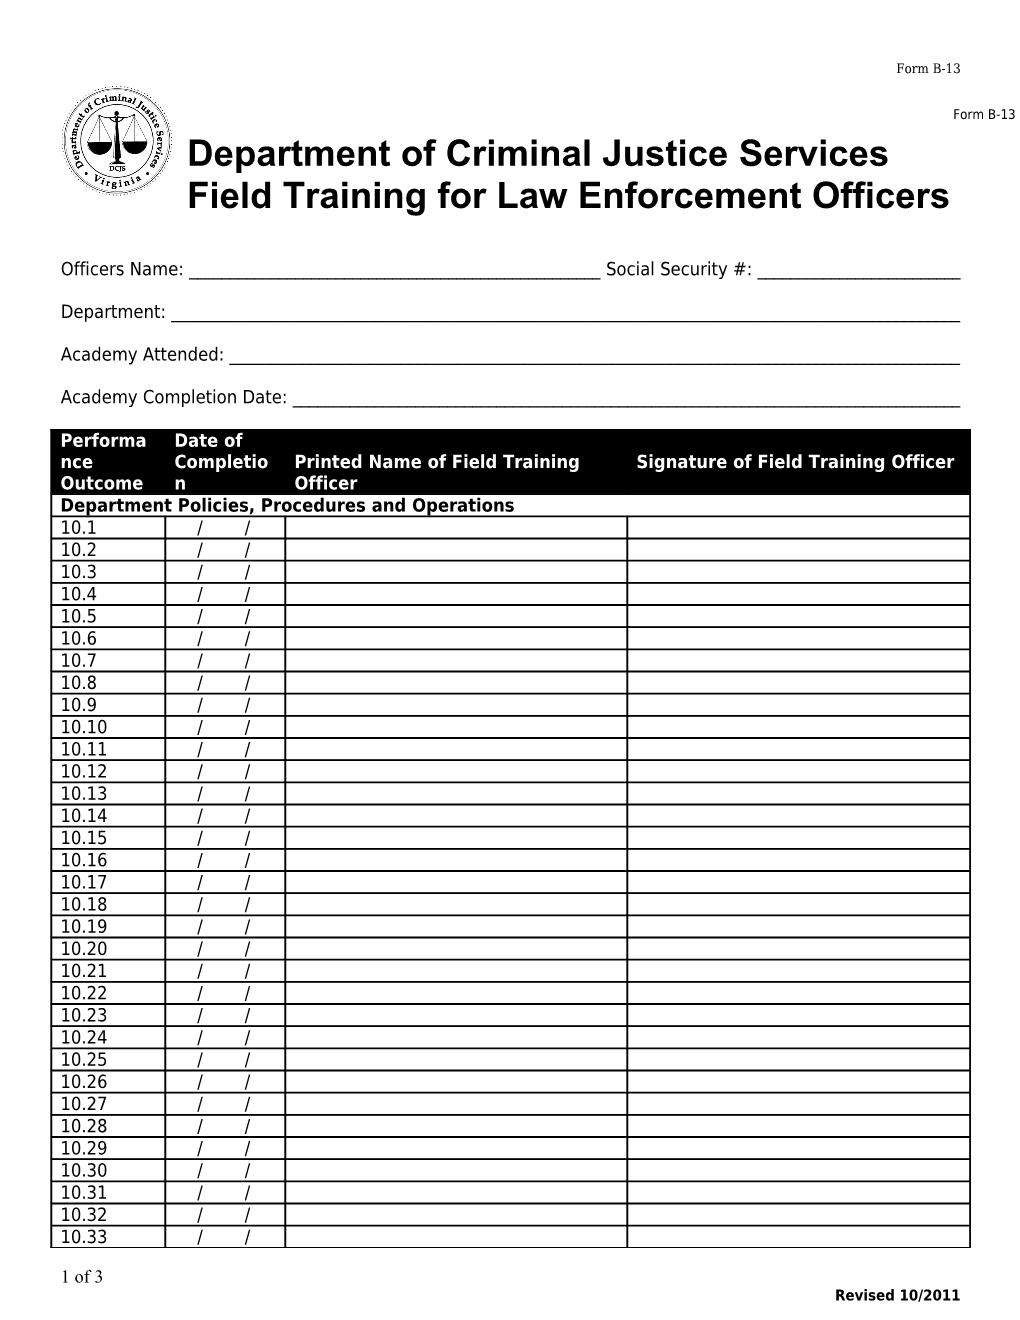 Field Training for Law Enforcement Officers